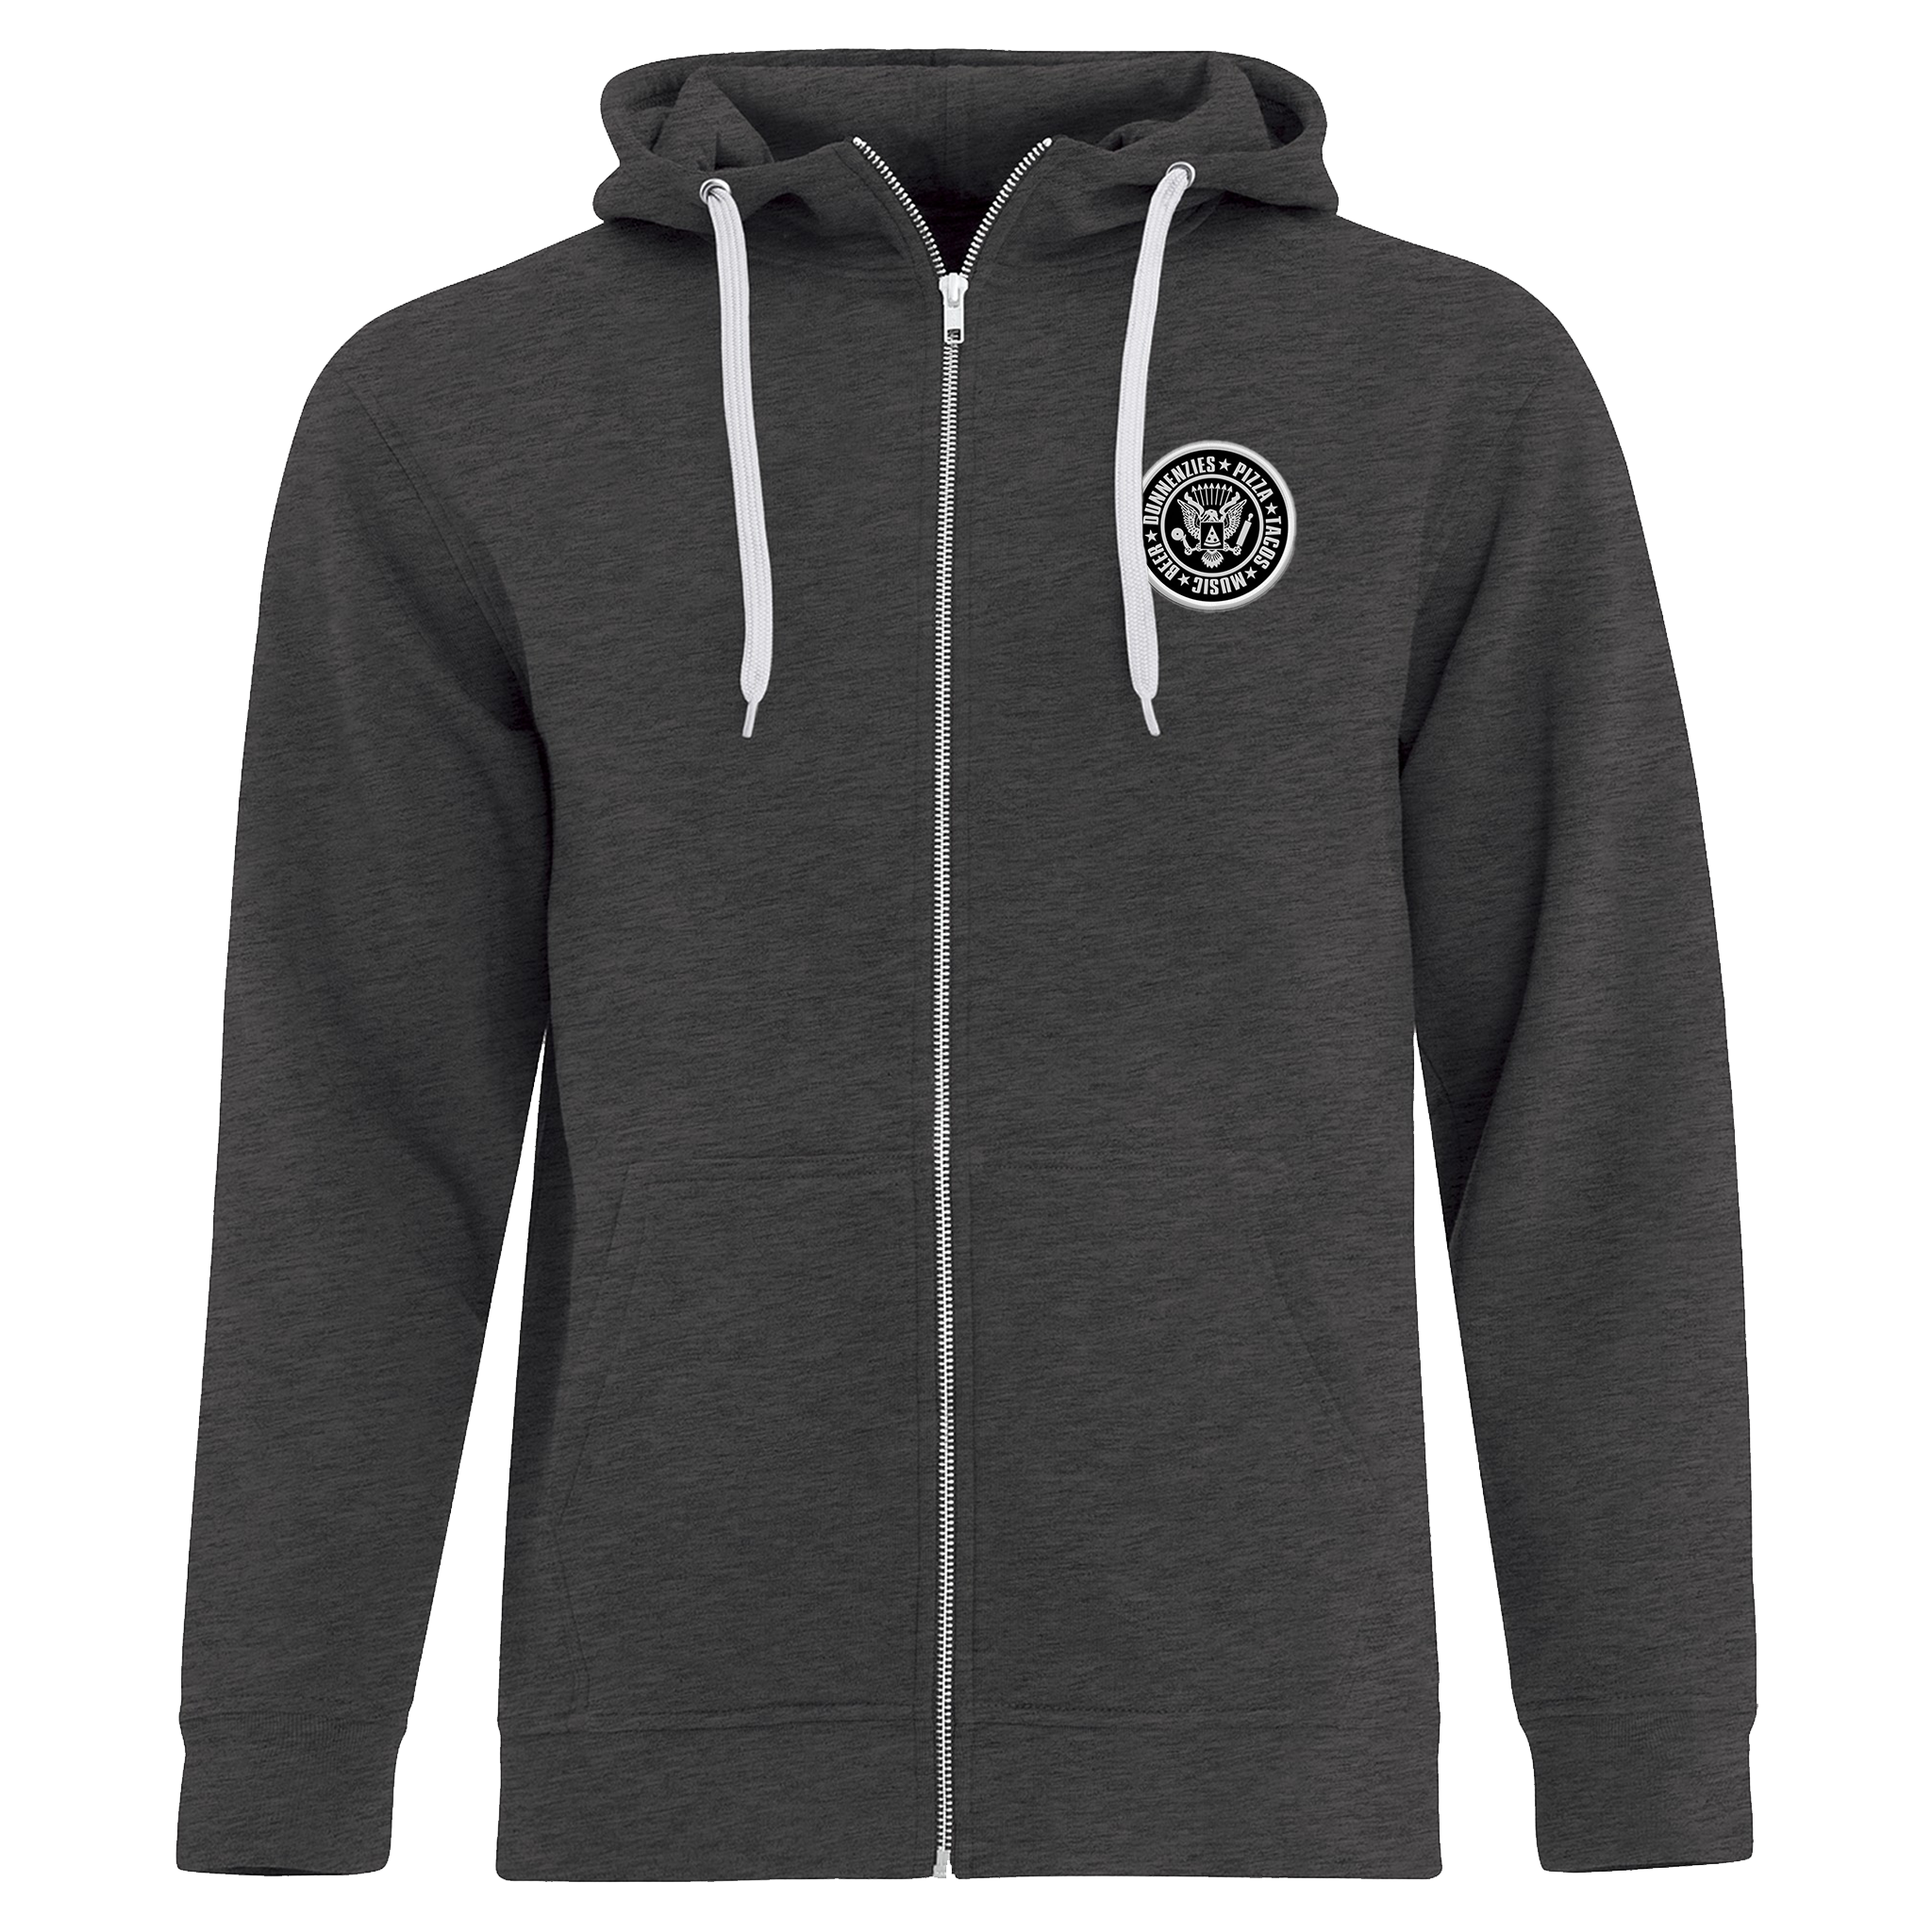 Dunnenzies ATC Esactive Fullzip Hoodie - Unisex Sizing XS-4XL - Charcoal